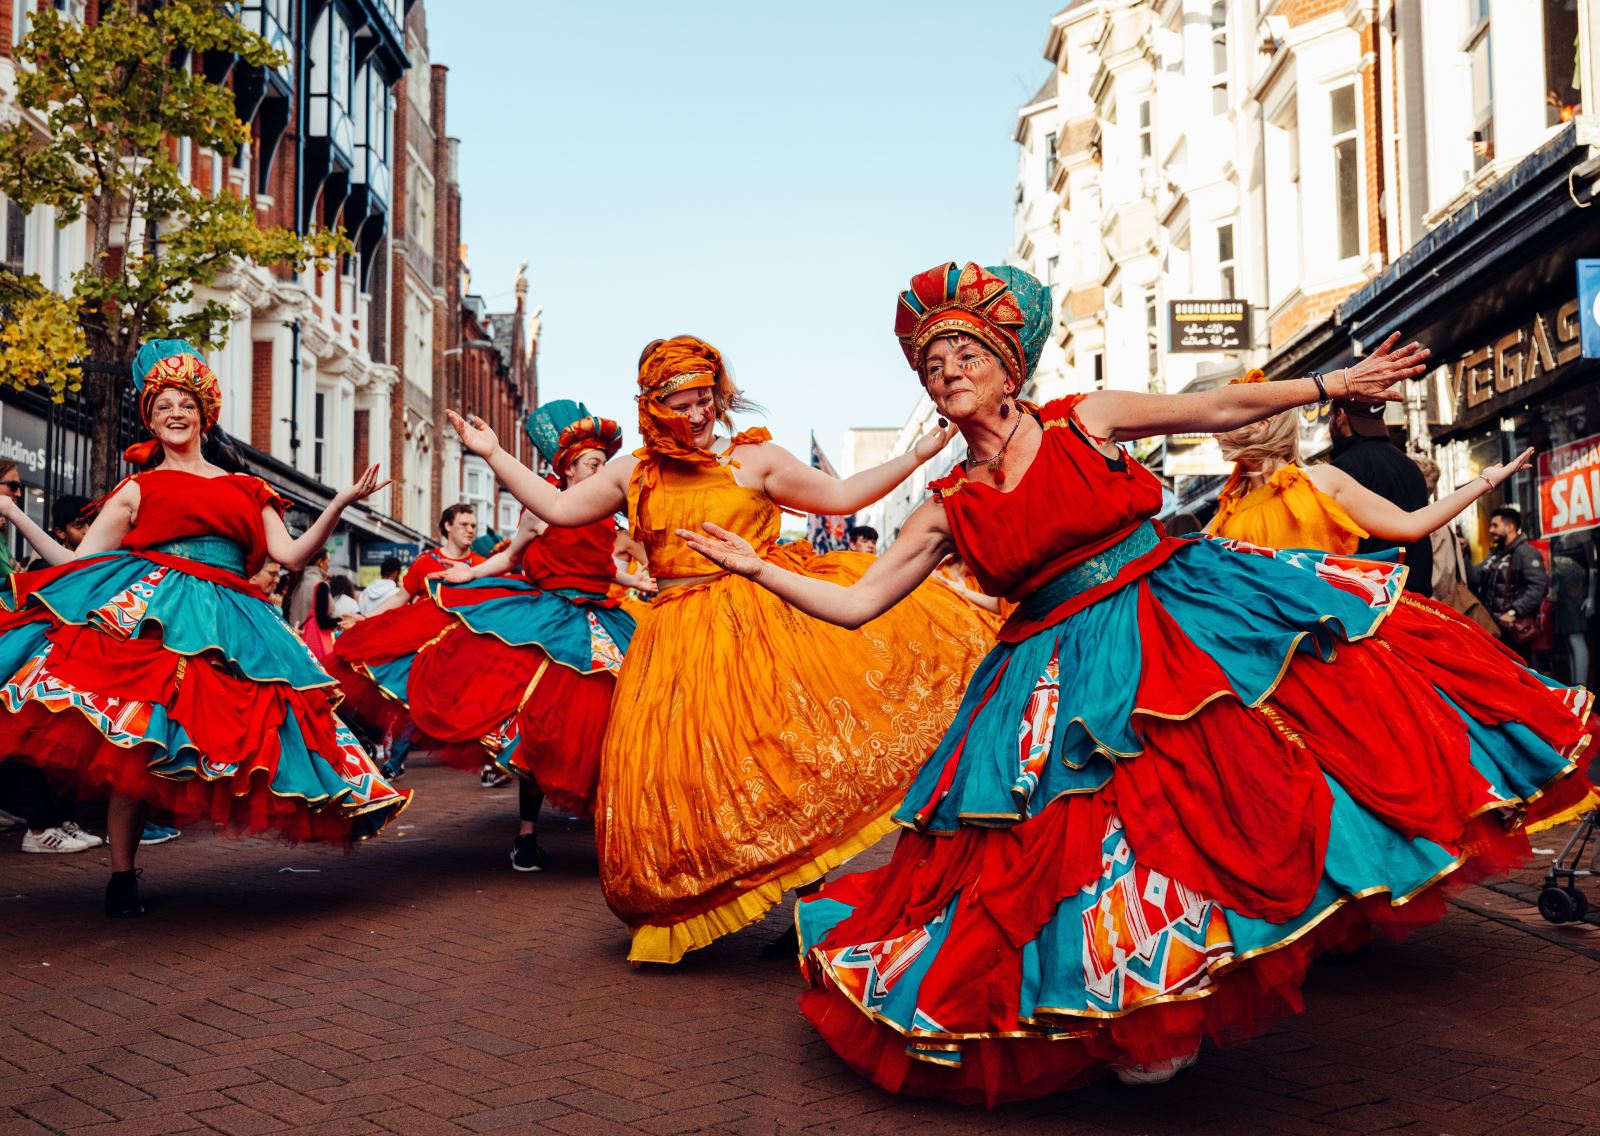 Three ladies dressed in bright colourful dresses smiling and dancing